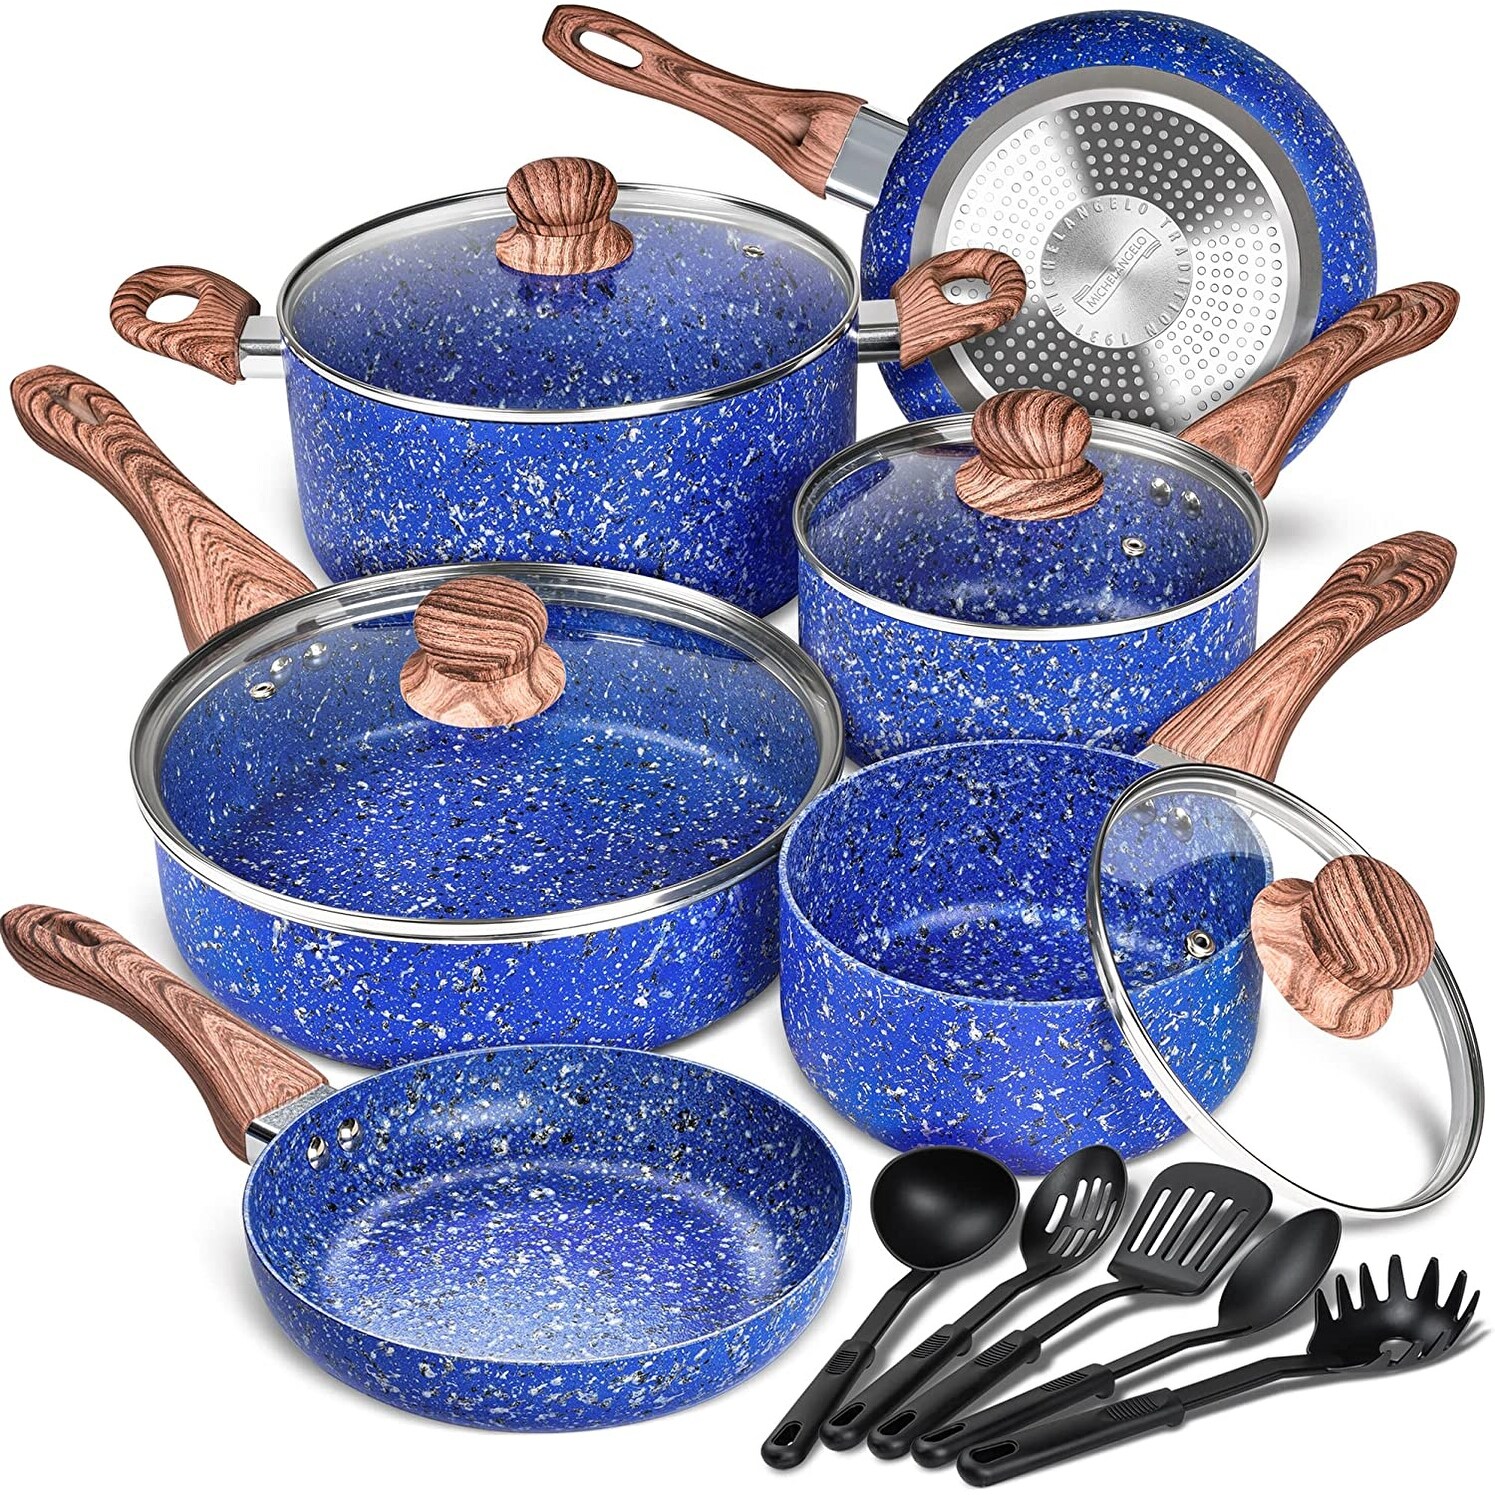 https://ak1.ostkcdn.com/images/products/is/images/direct/68d20d70ca81b85696420789584f3bec7753c3a9/Pots-and-Pans-Set-15-Piece%2C-Nonstick-Cookware-Set-with-with-Non--toxic-Stone-Derived-Interior.jpg